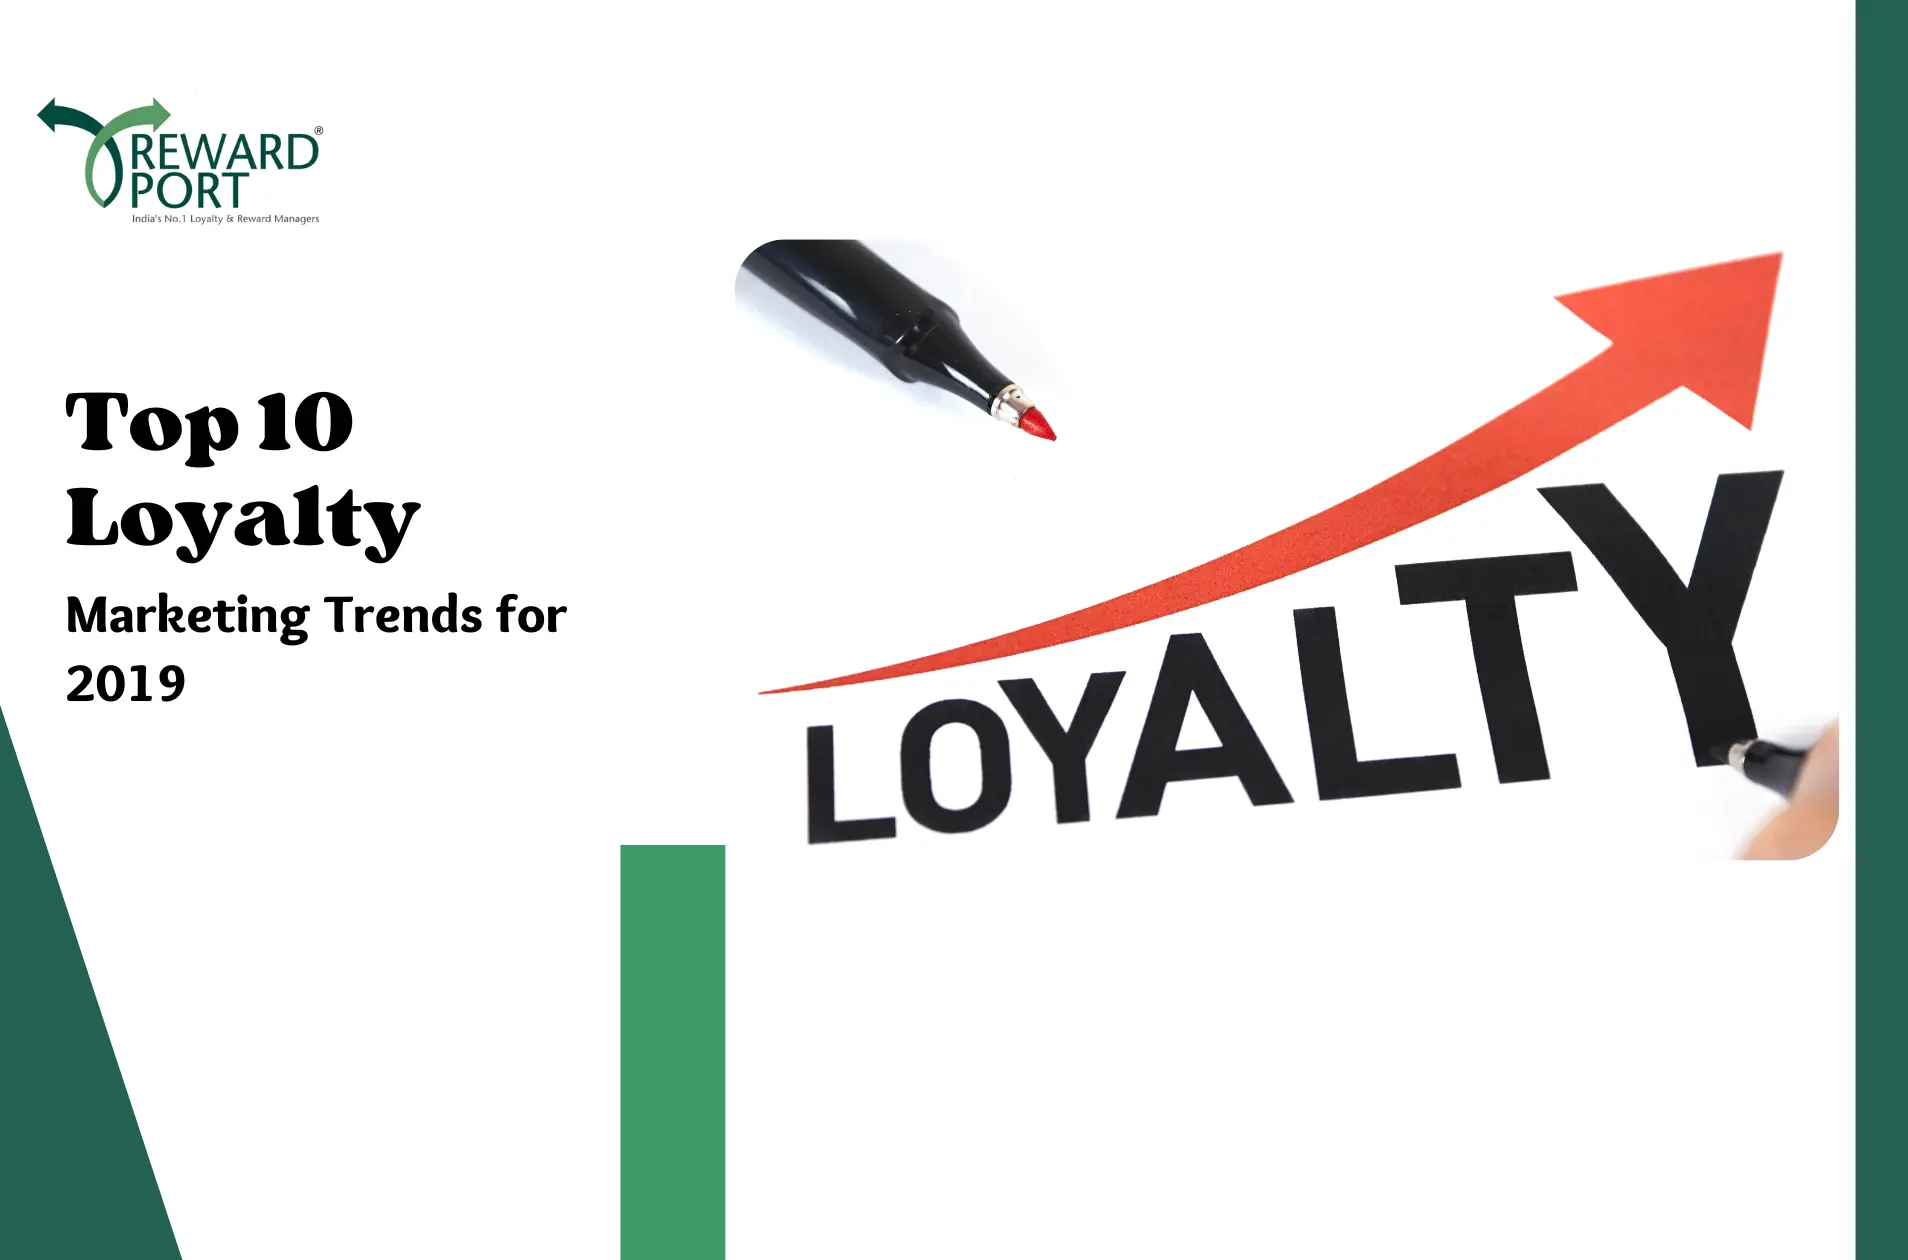 Top 10 Loyalty Marketing Trends for 2019